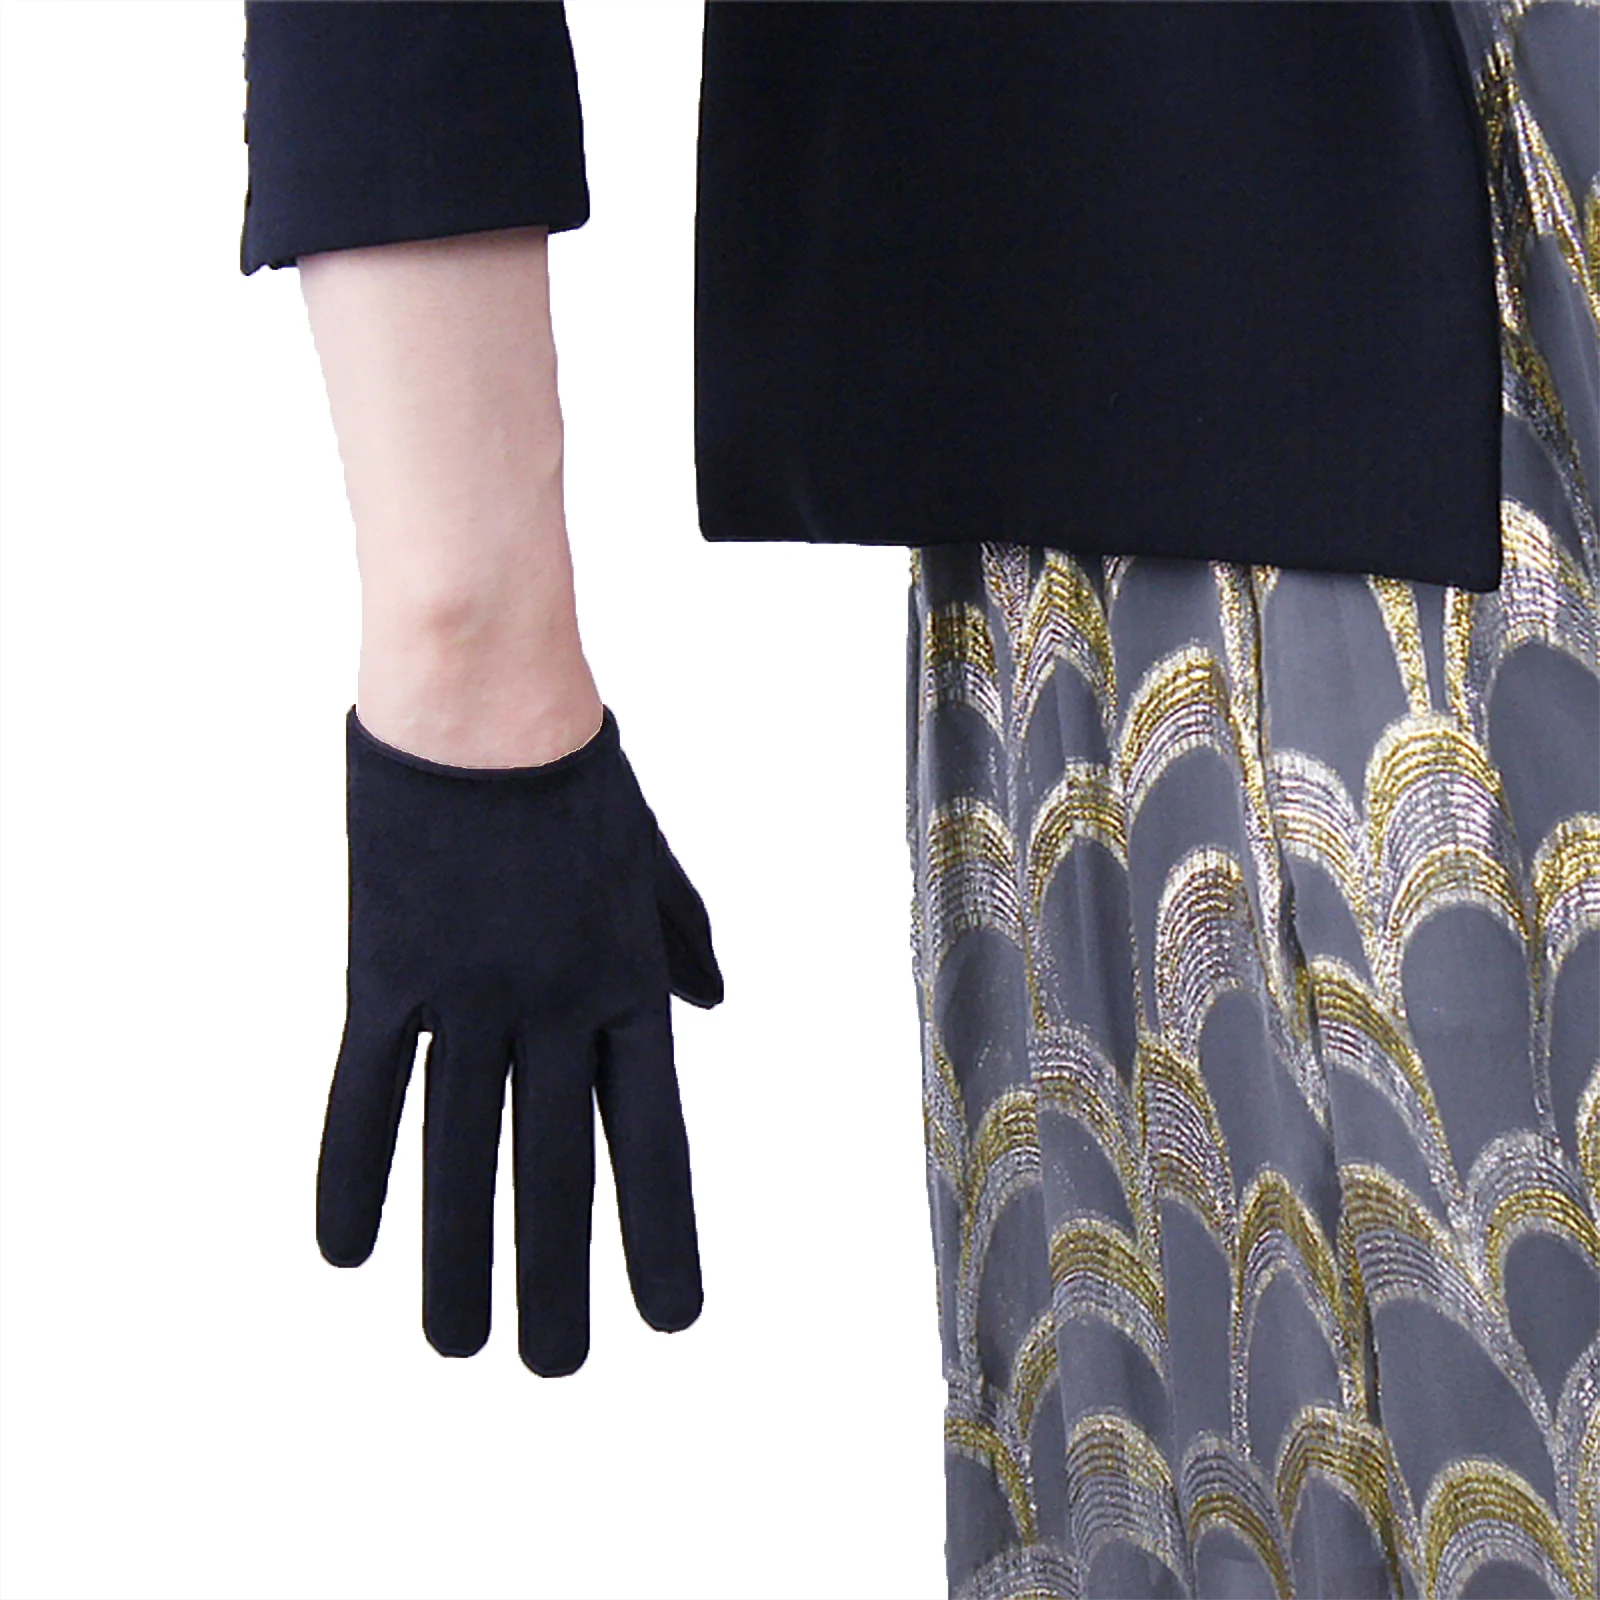 

Women's Black Suede Gloves Extra Short 16cm Faux Leather Evening Party Dressing Halloween Costume Cosplay Driving Glove